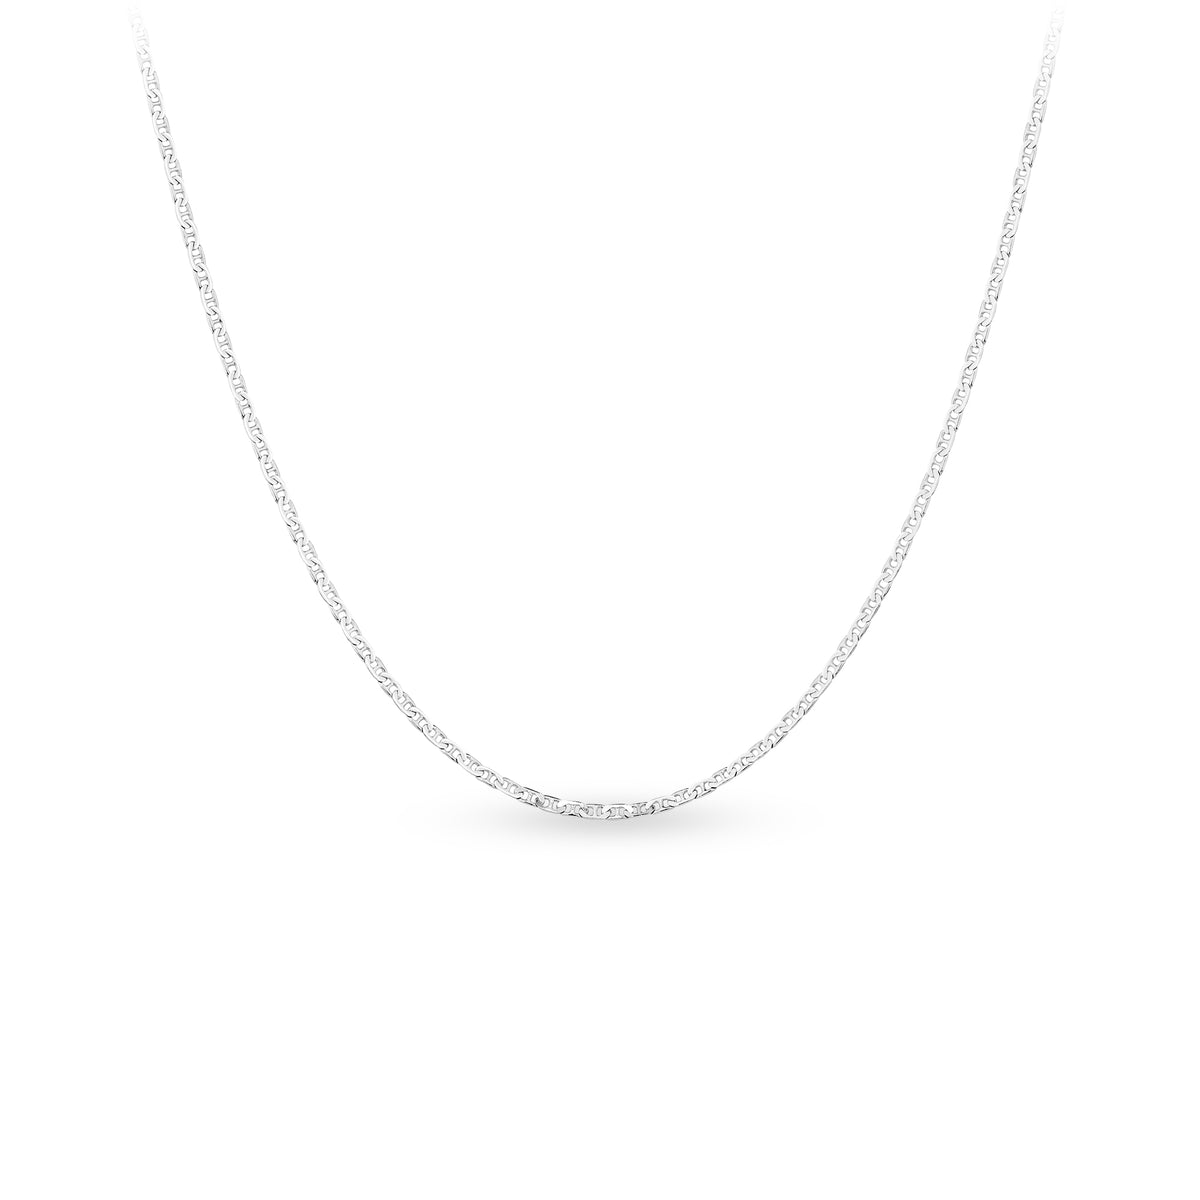 50cm Chain in Sterling Silver